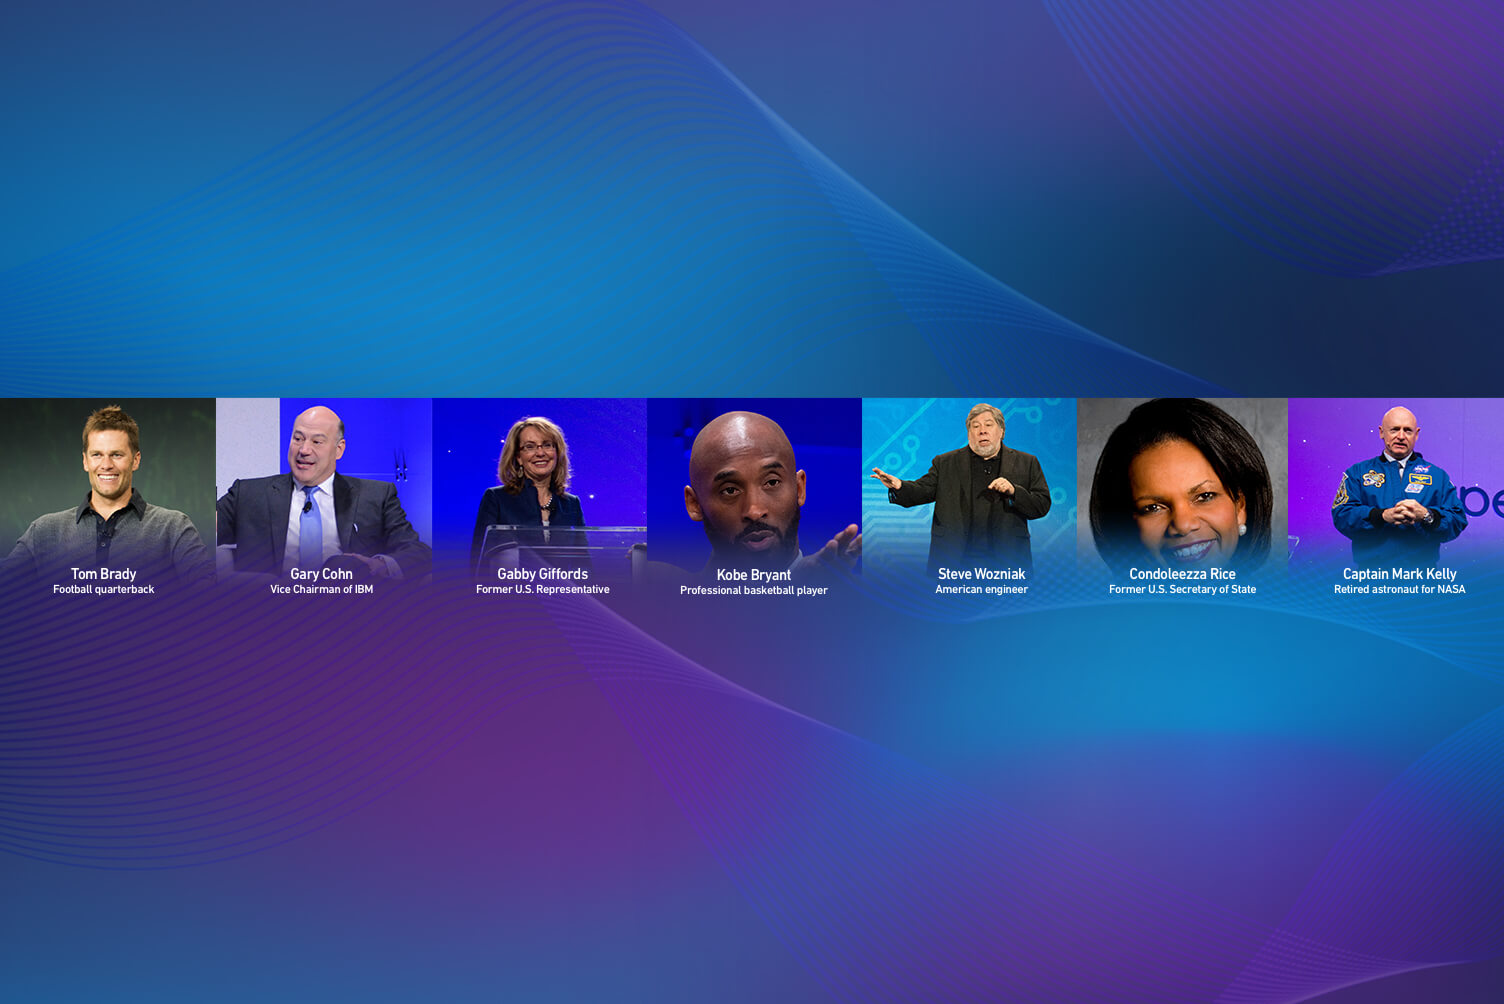 Wide and short image spanning across full width of the page highlighting speakers from prior years. From left to right: Tom Brady | Football quarterback, Gary Cohn | Vice Chairman of IBM, Aaron Rodgers | Football Quarterback, Gabby Giffords | Former U.S. Representative, Kobe Bryant | Former Professional basketball player, Steve Wozniak | American engineer, Condoleeza Rice | Former U.S. Secretary of State, Captain Mark Kelly | Retired astronaut for NASA.